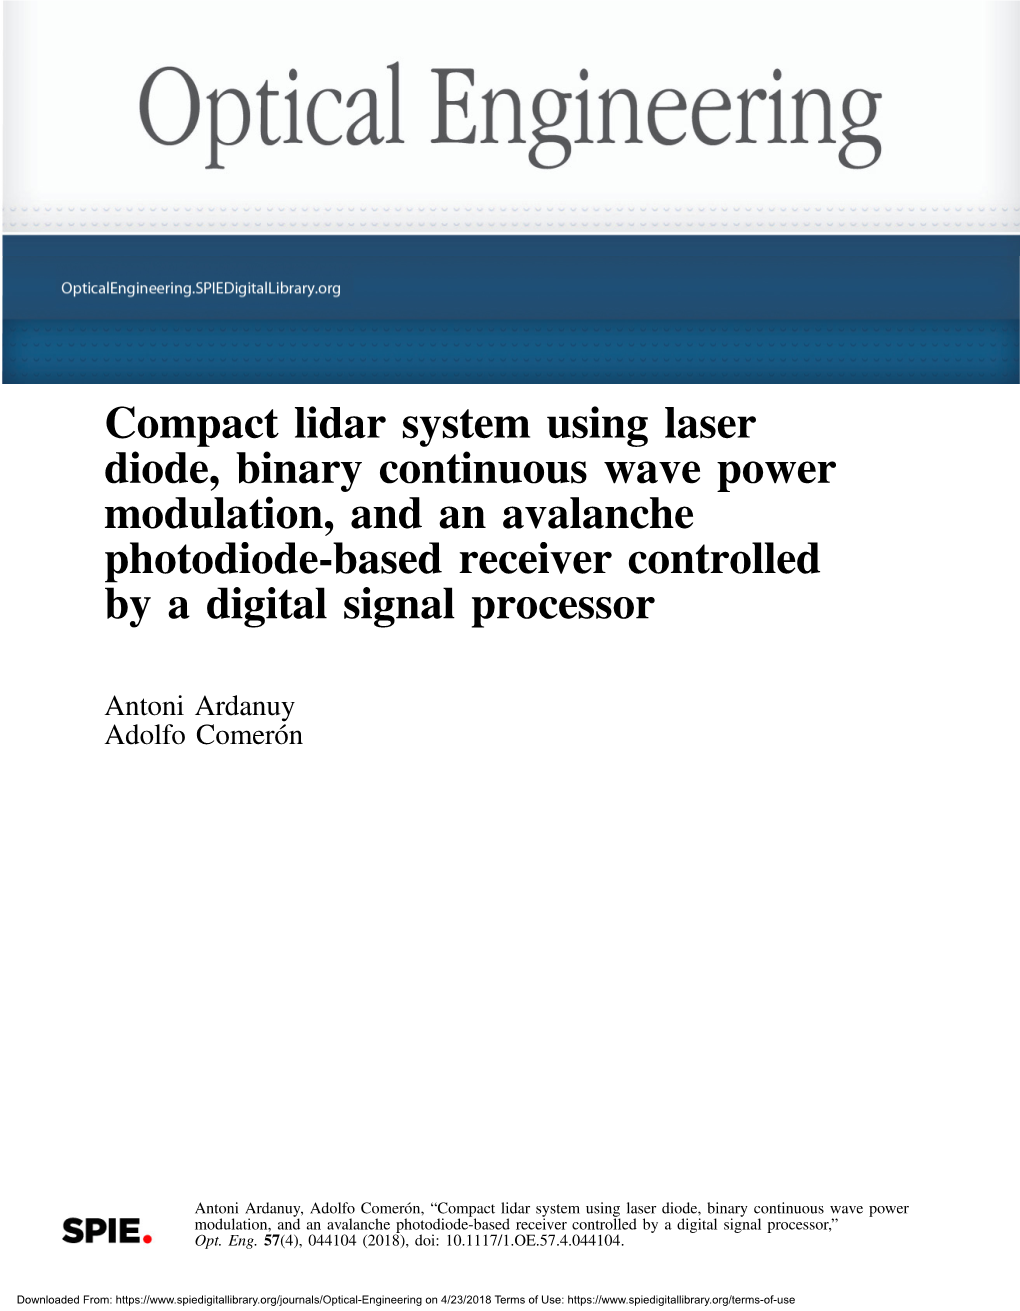 Compact Lidar System Using Laser Diode, Binary Continuous Wave Power Modulation, and an Avalanche Photodiode-Based Receiver Controlled by a Digital Signal Processor